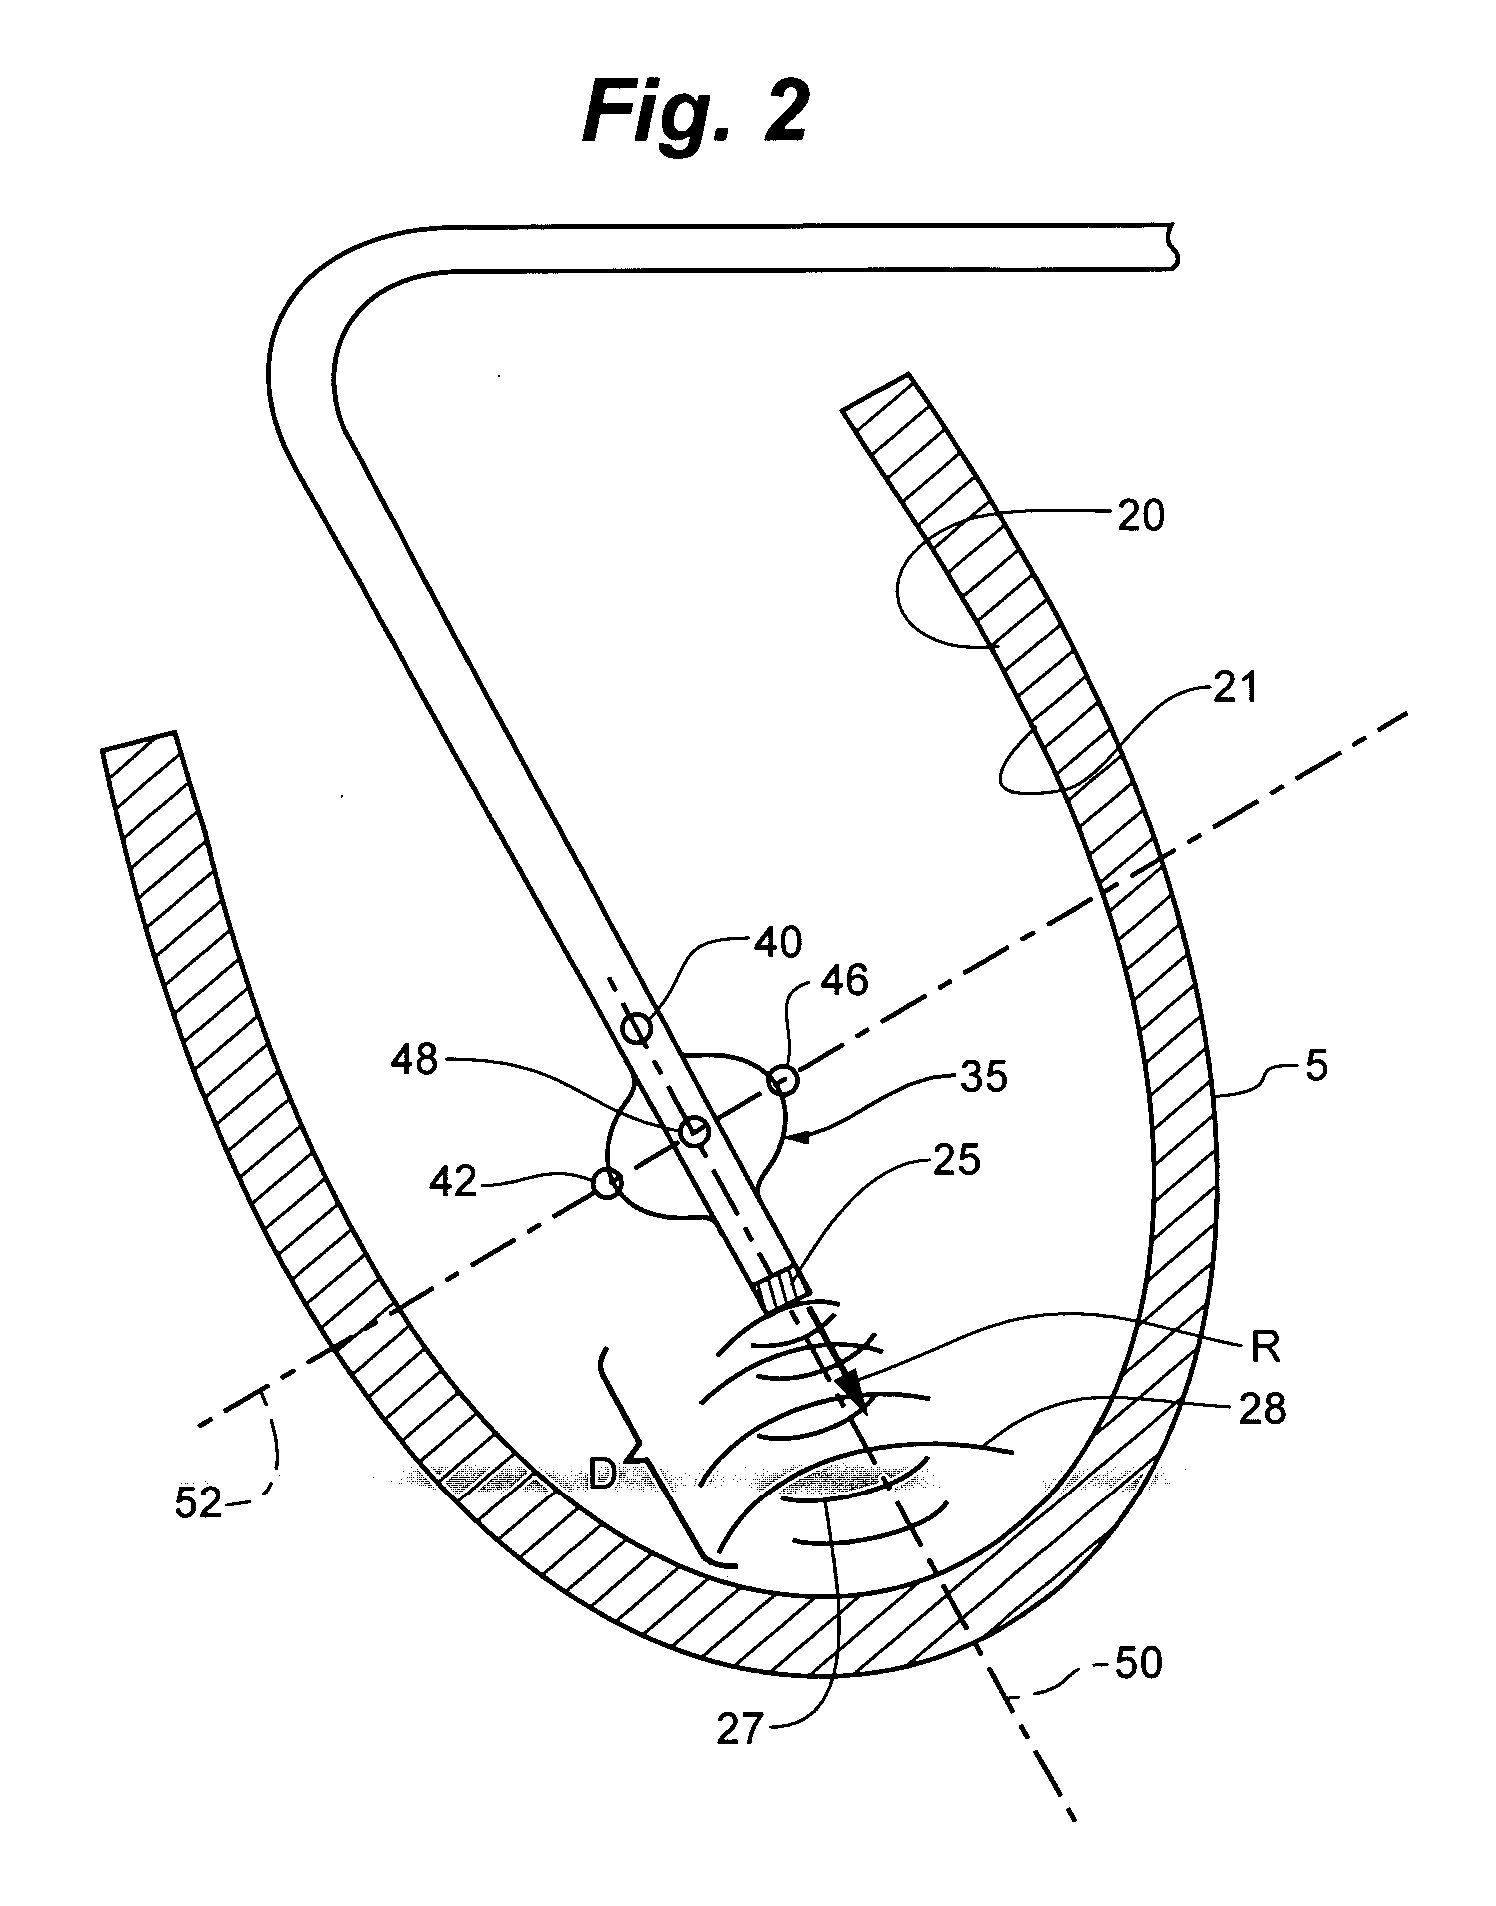 System and method for navigating an ultrasound catheter to image a beating heart